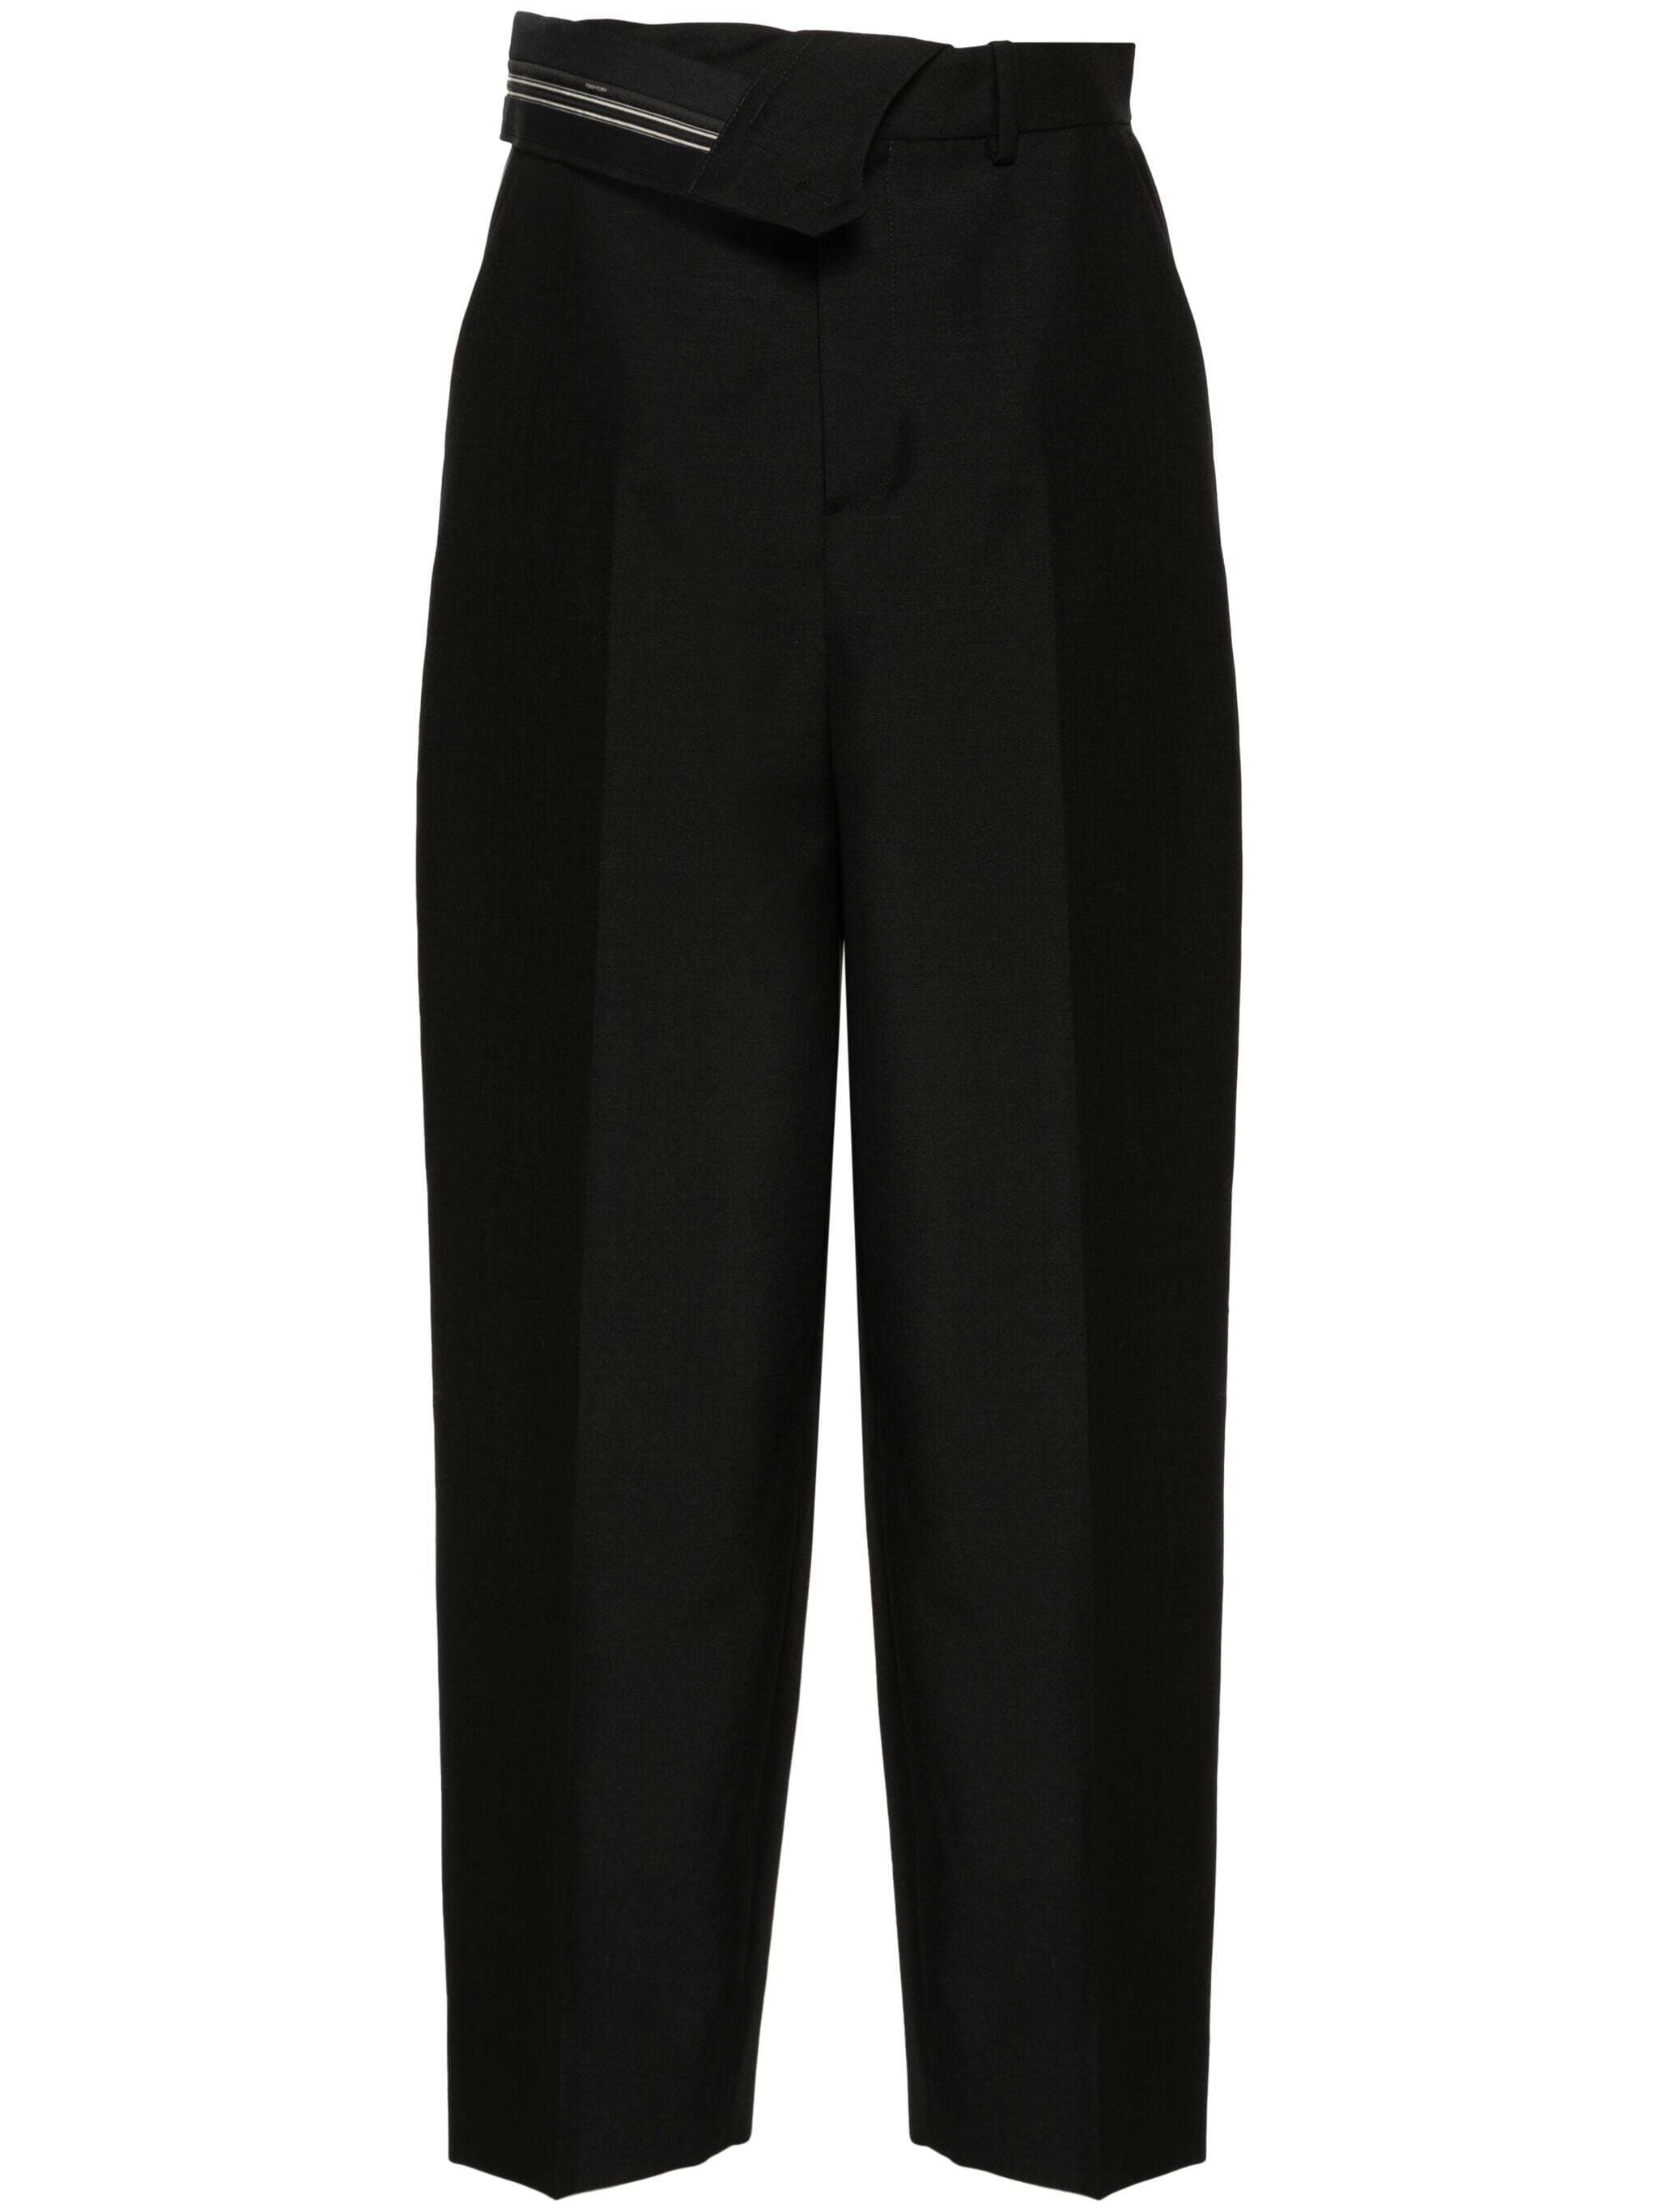 Carrot-fit trousers with asymmetric waist